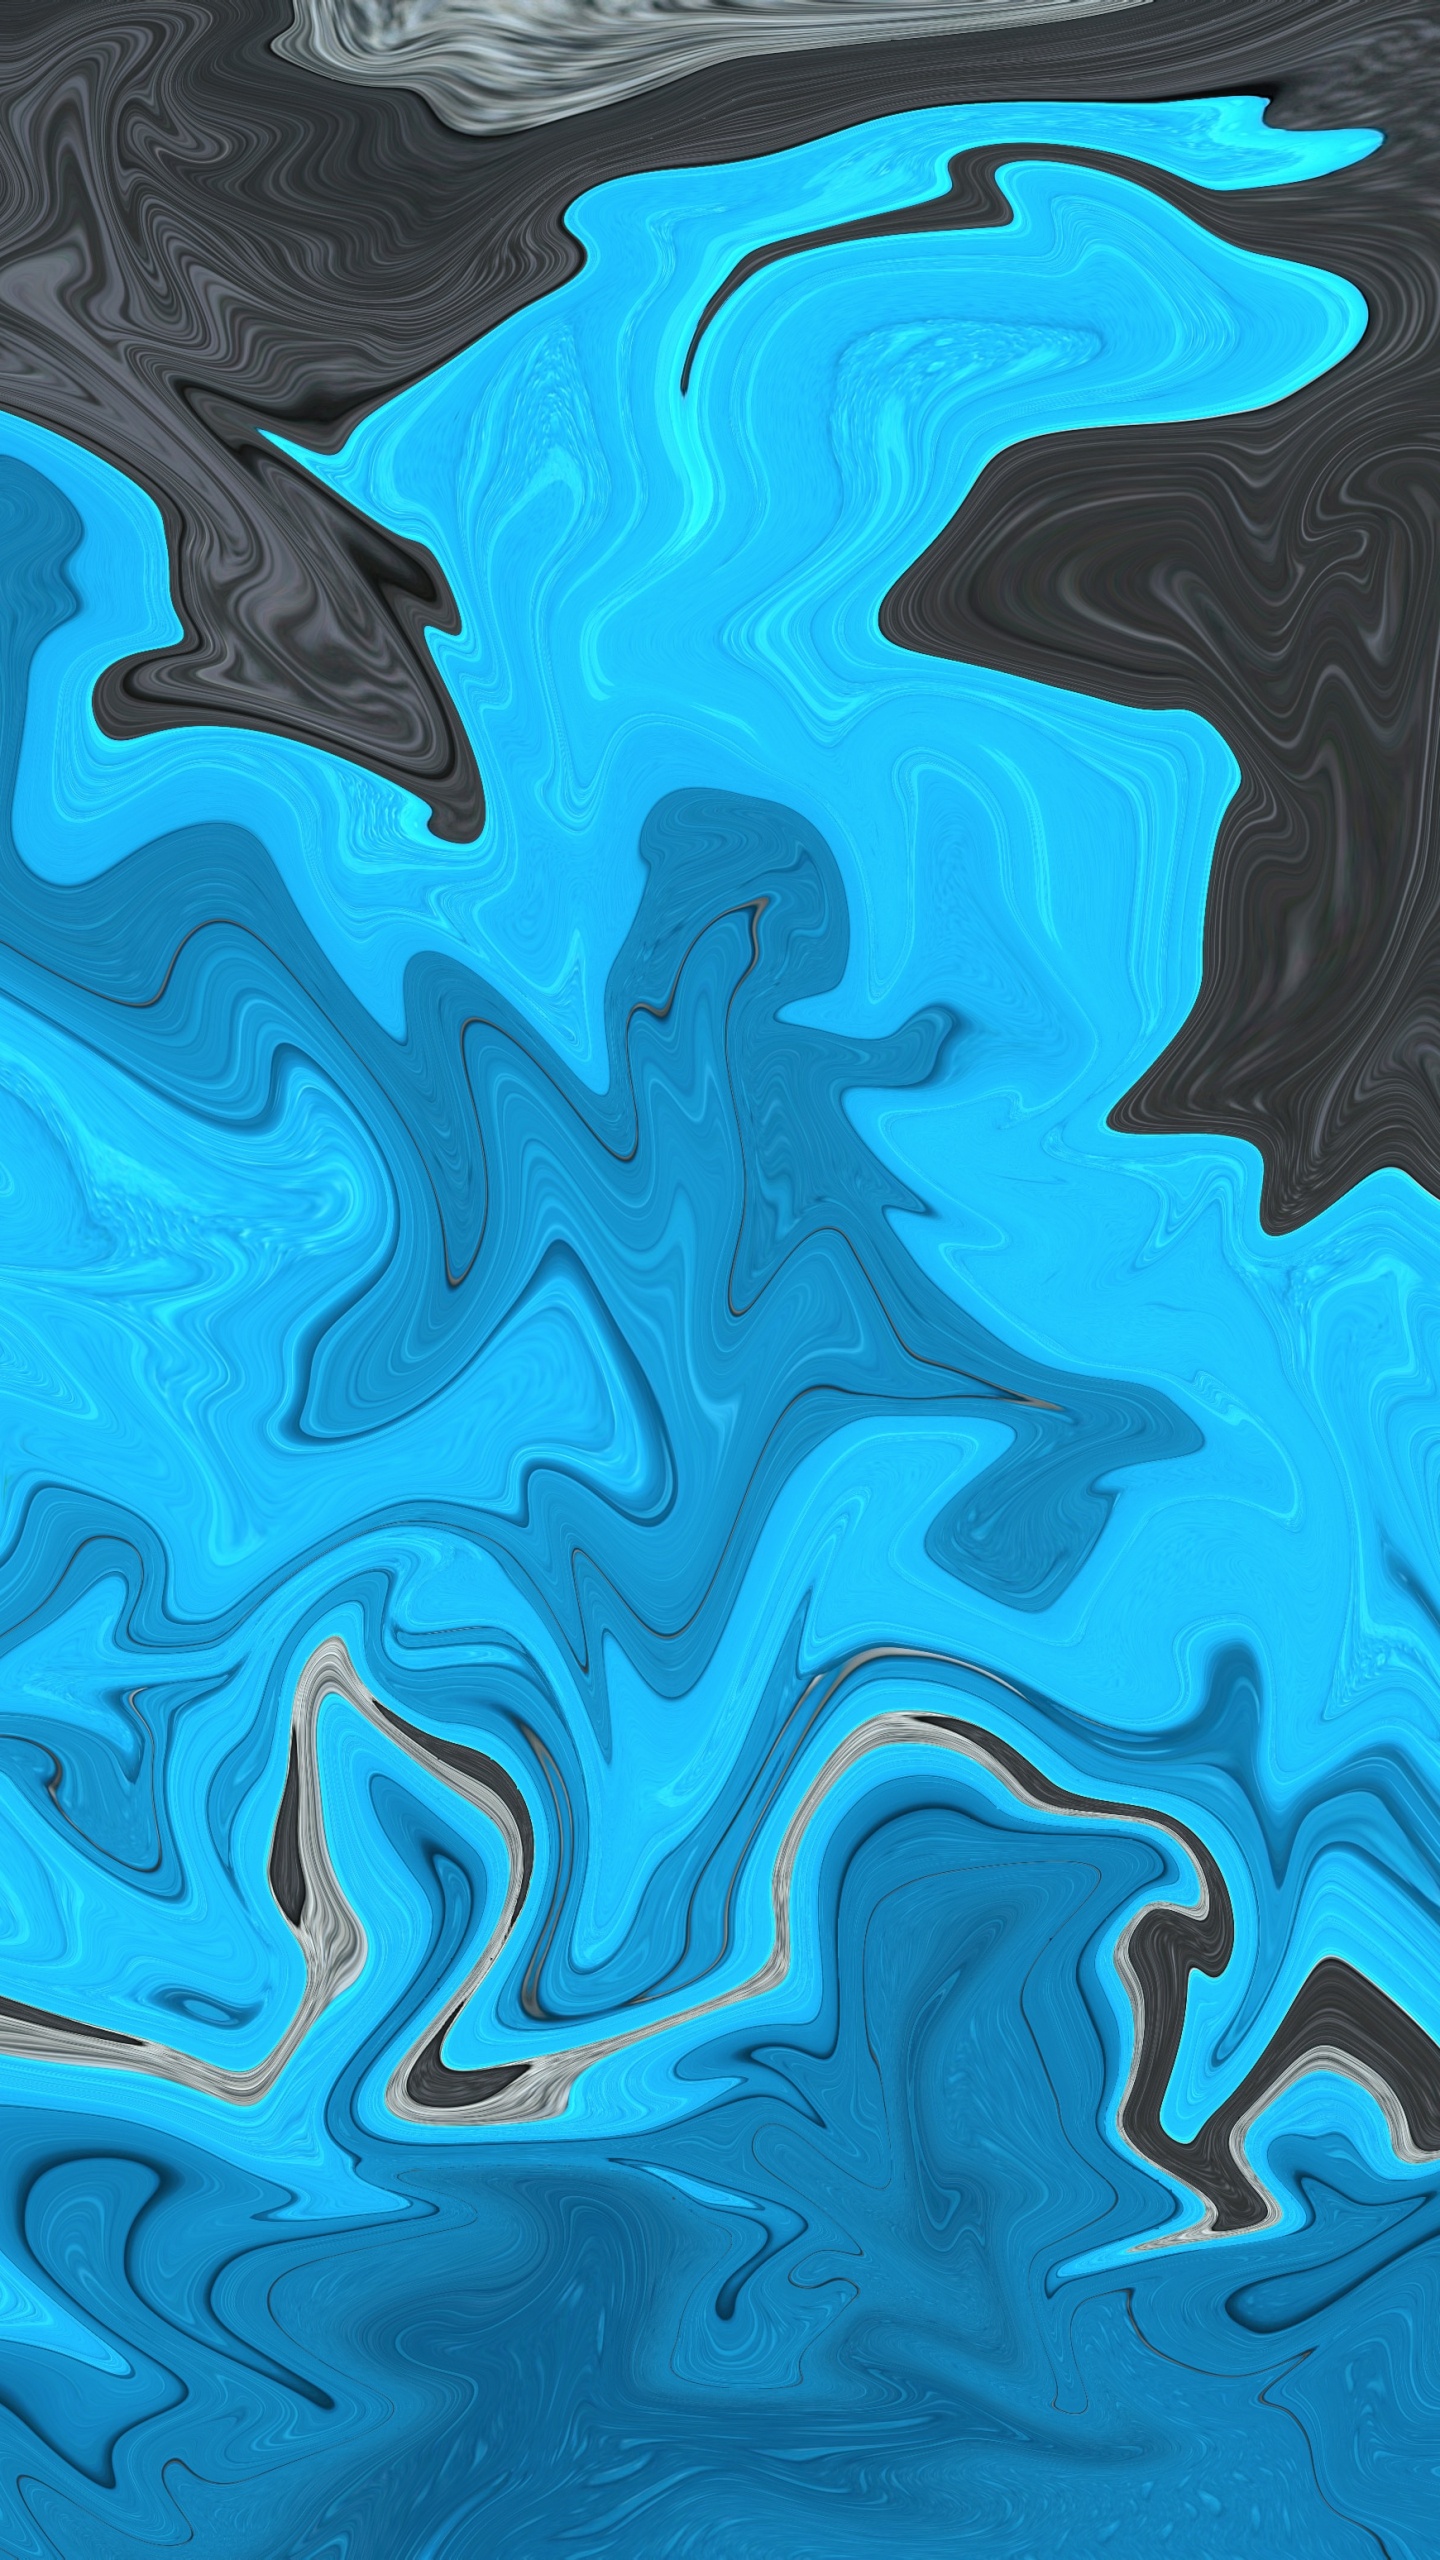 Blue and Black Abstract Painting. Wallpaper in 1440x2560 Resolution